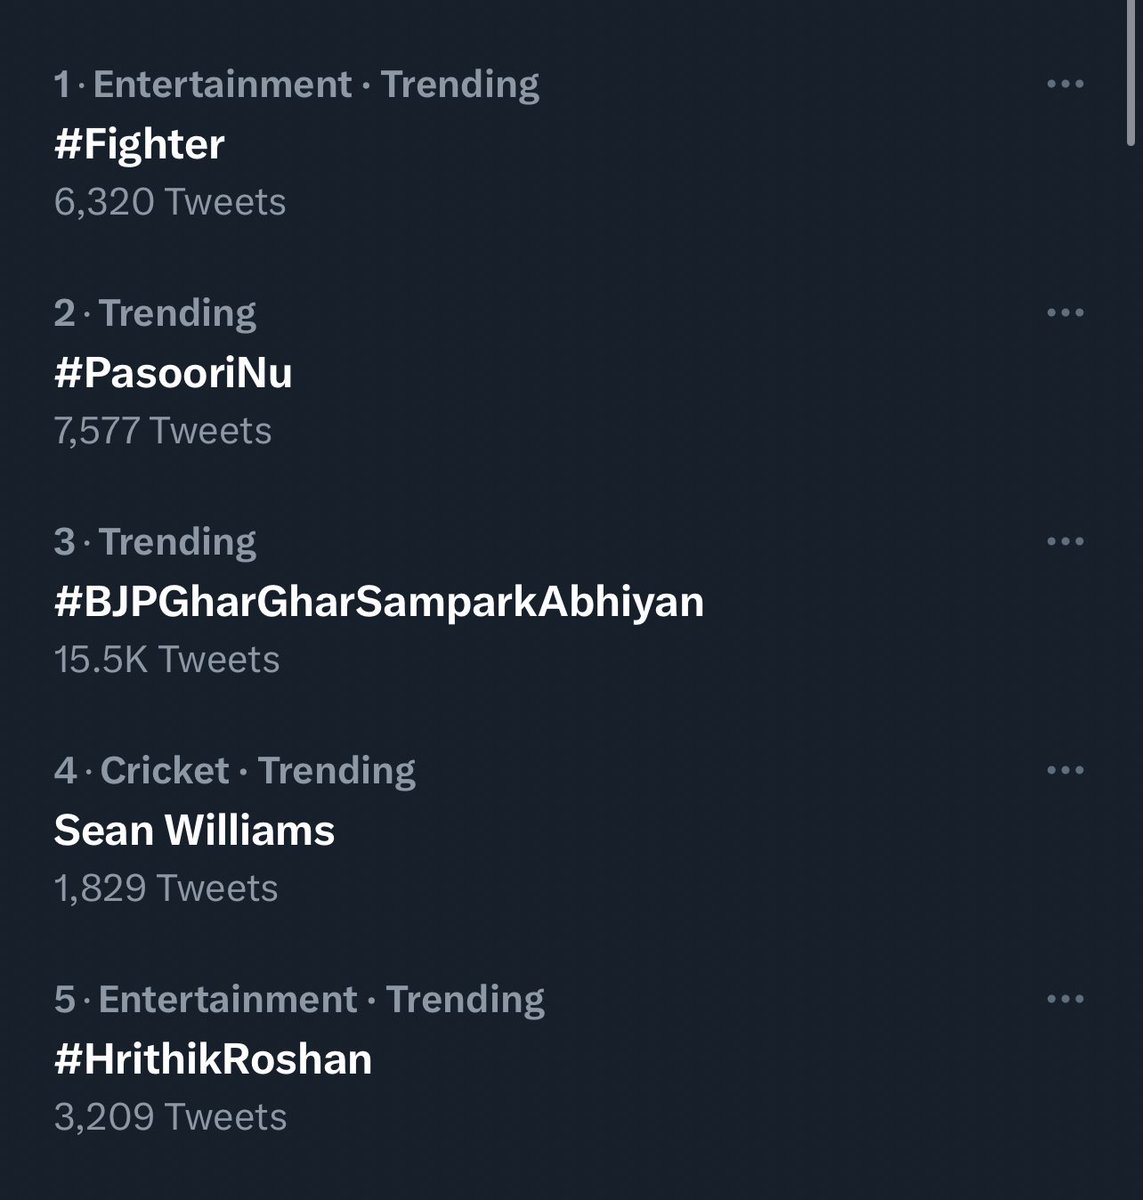 In the top 5 😬🥳 #HrithikRoshan #Fighter #SiddharthAnand